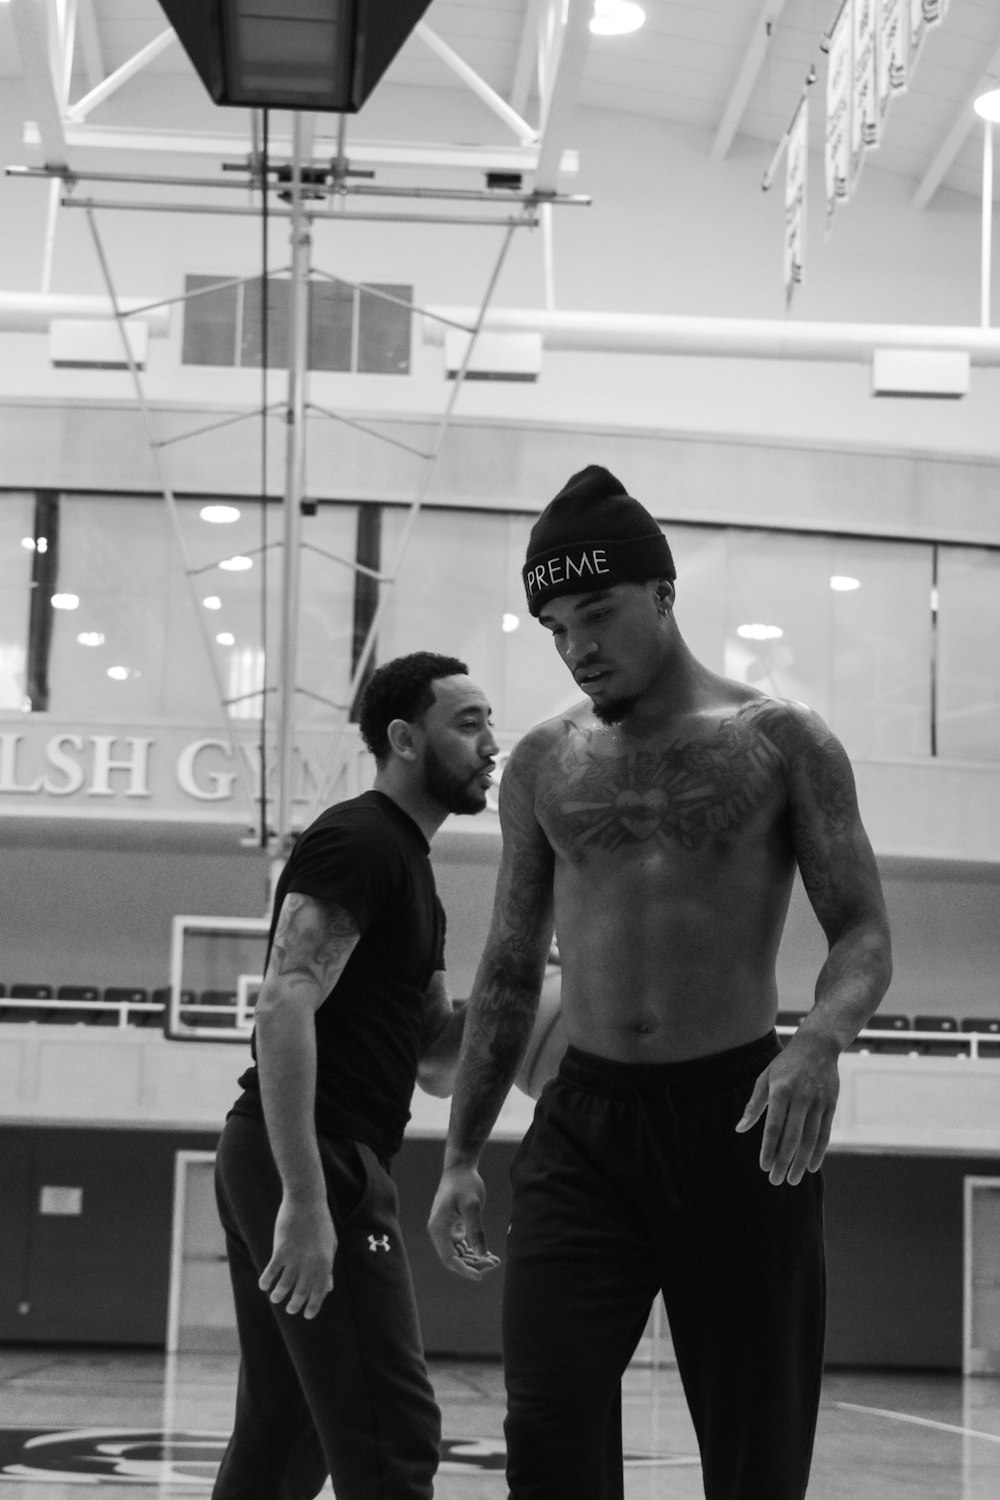 a shirtless man standing next to another man on a basketball court